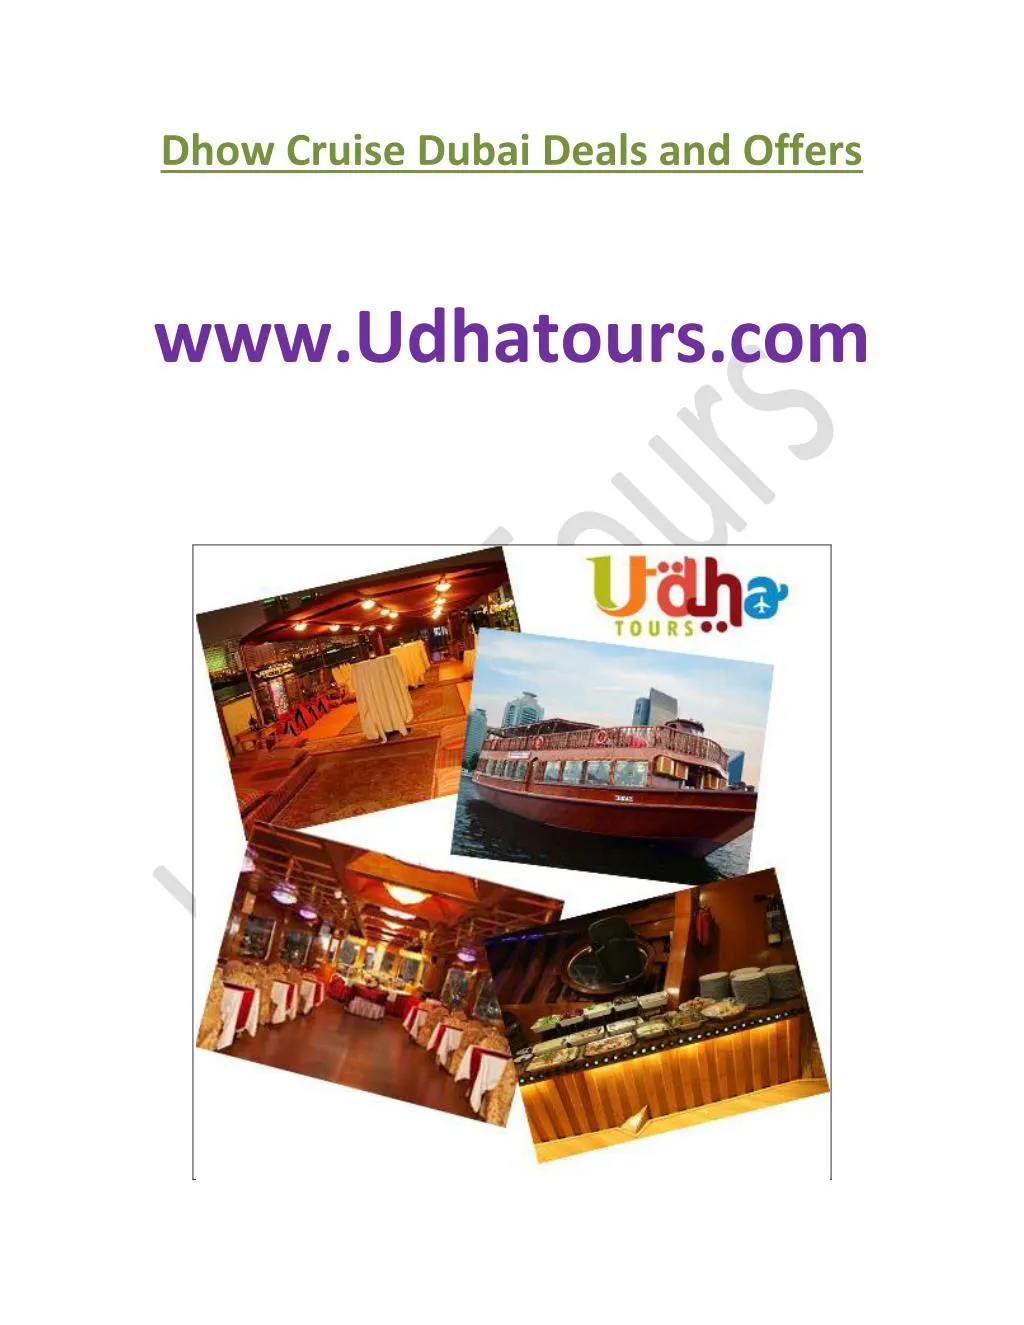 dhow cruise dubai deals and offers